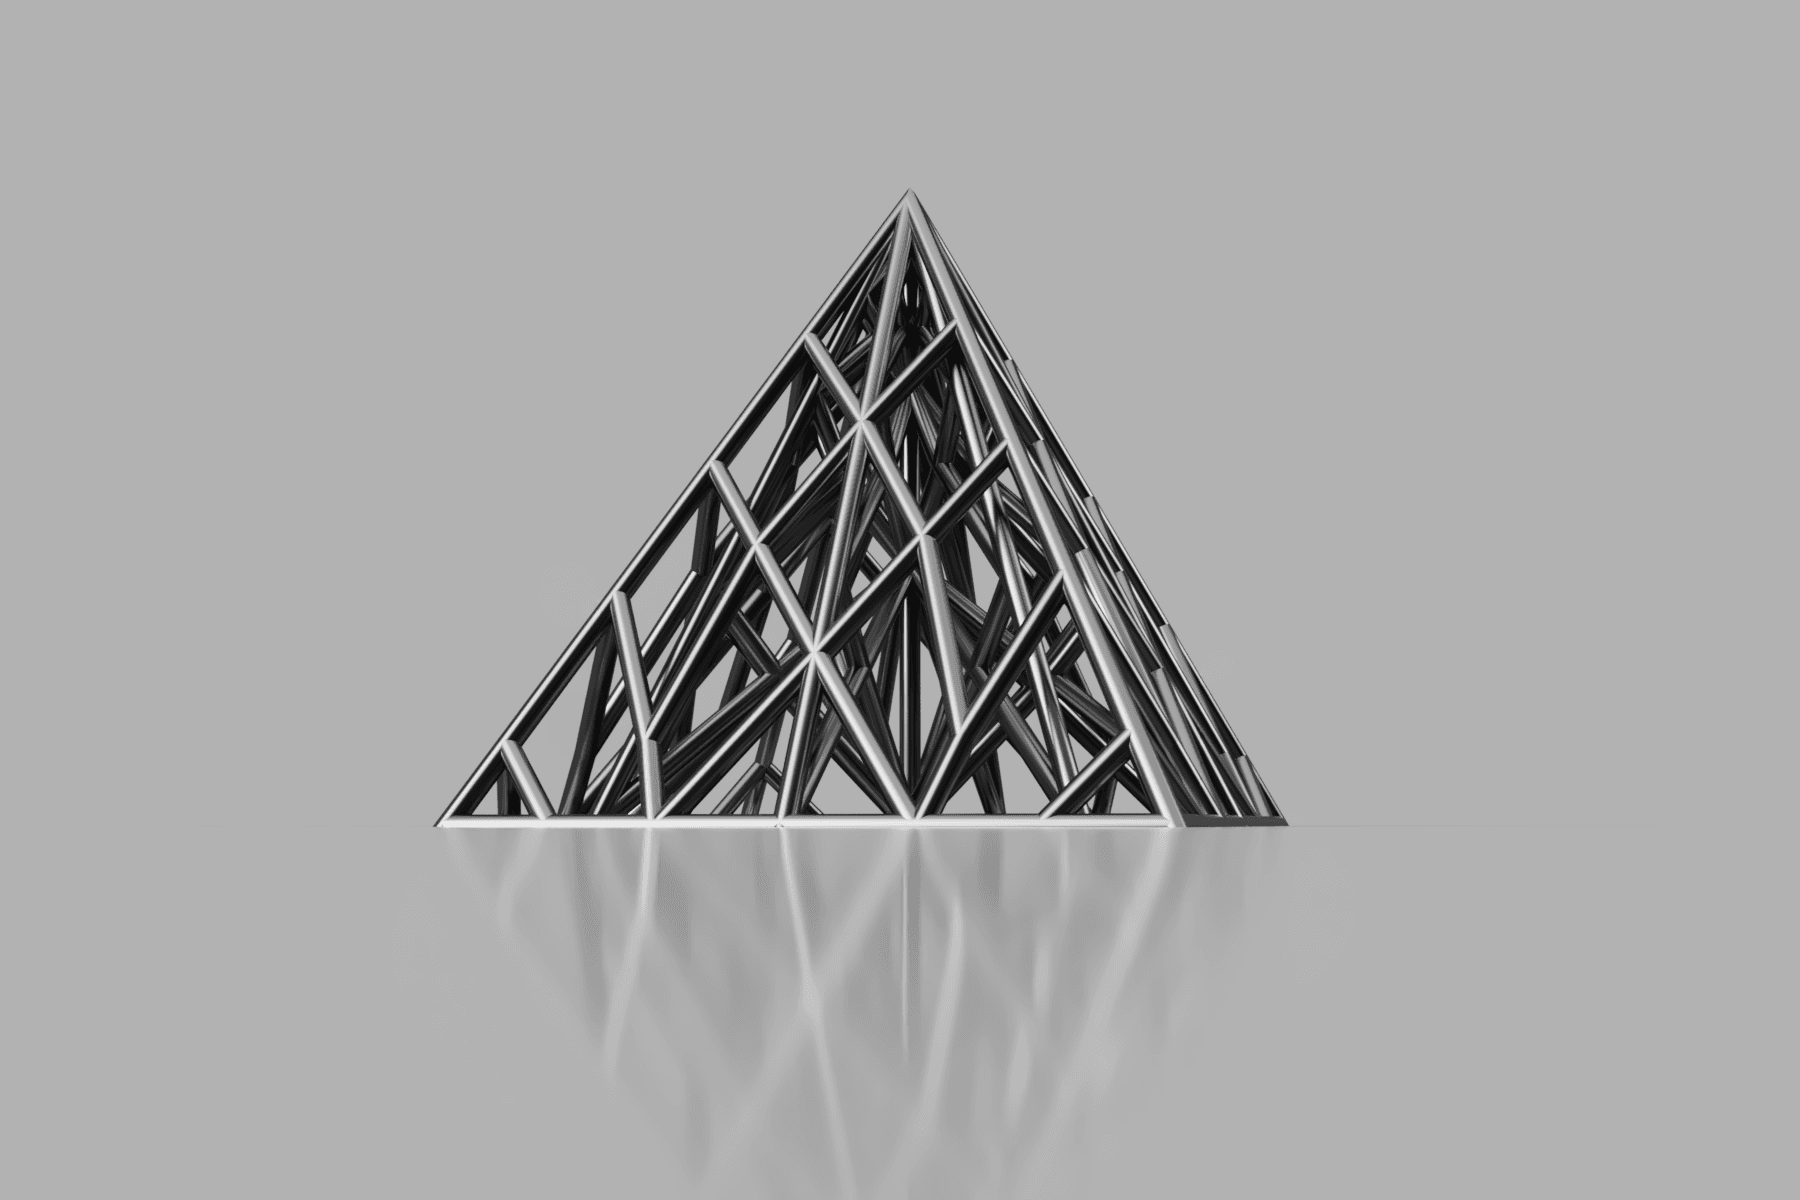 WIRE PYRAMID 3d model